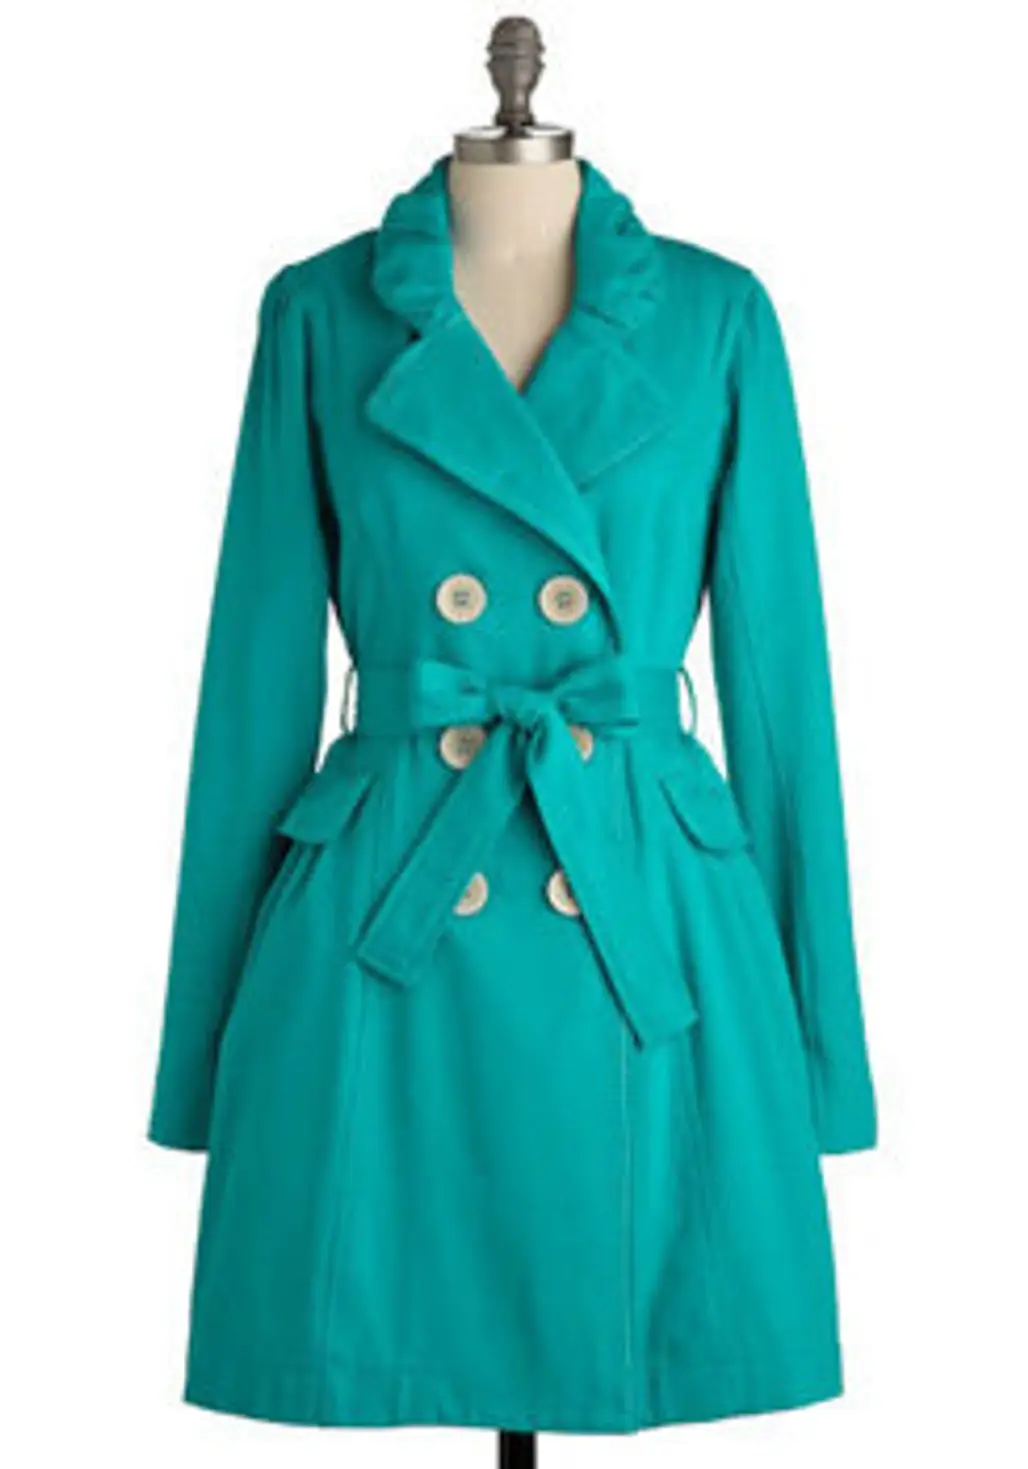 Turquoise Poise Trench